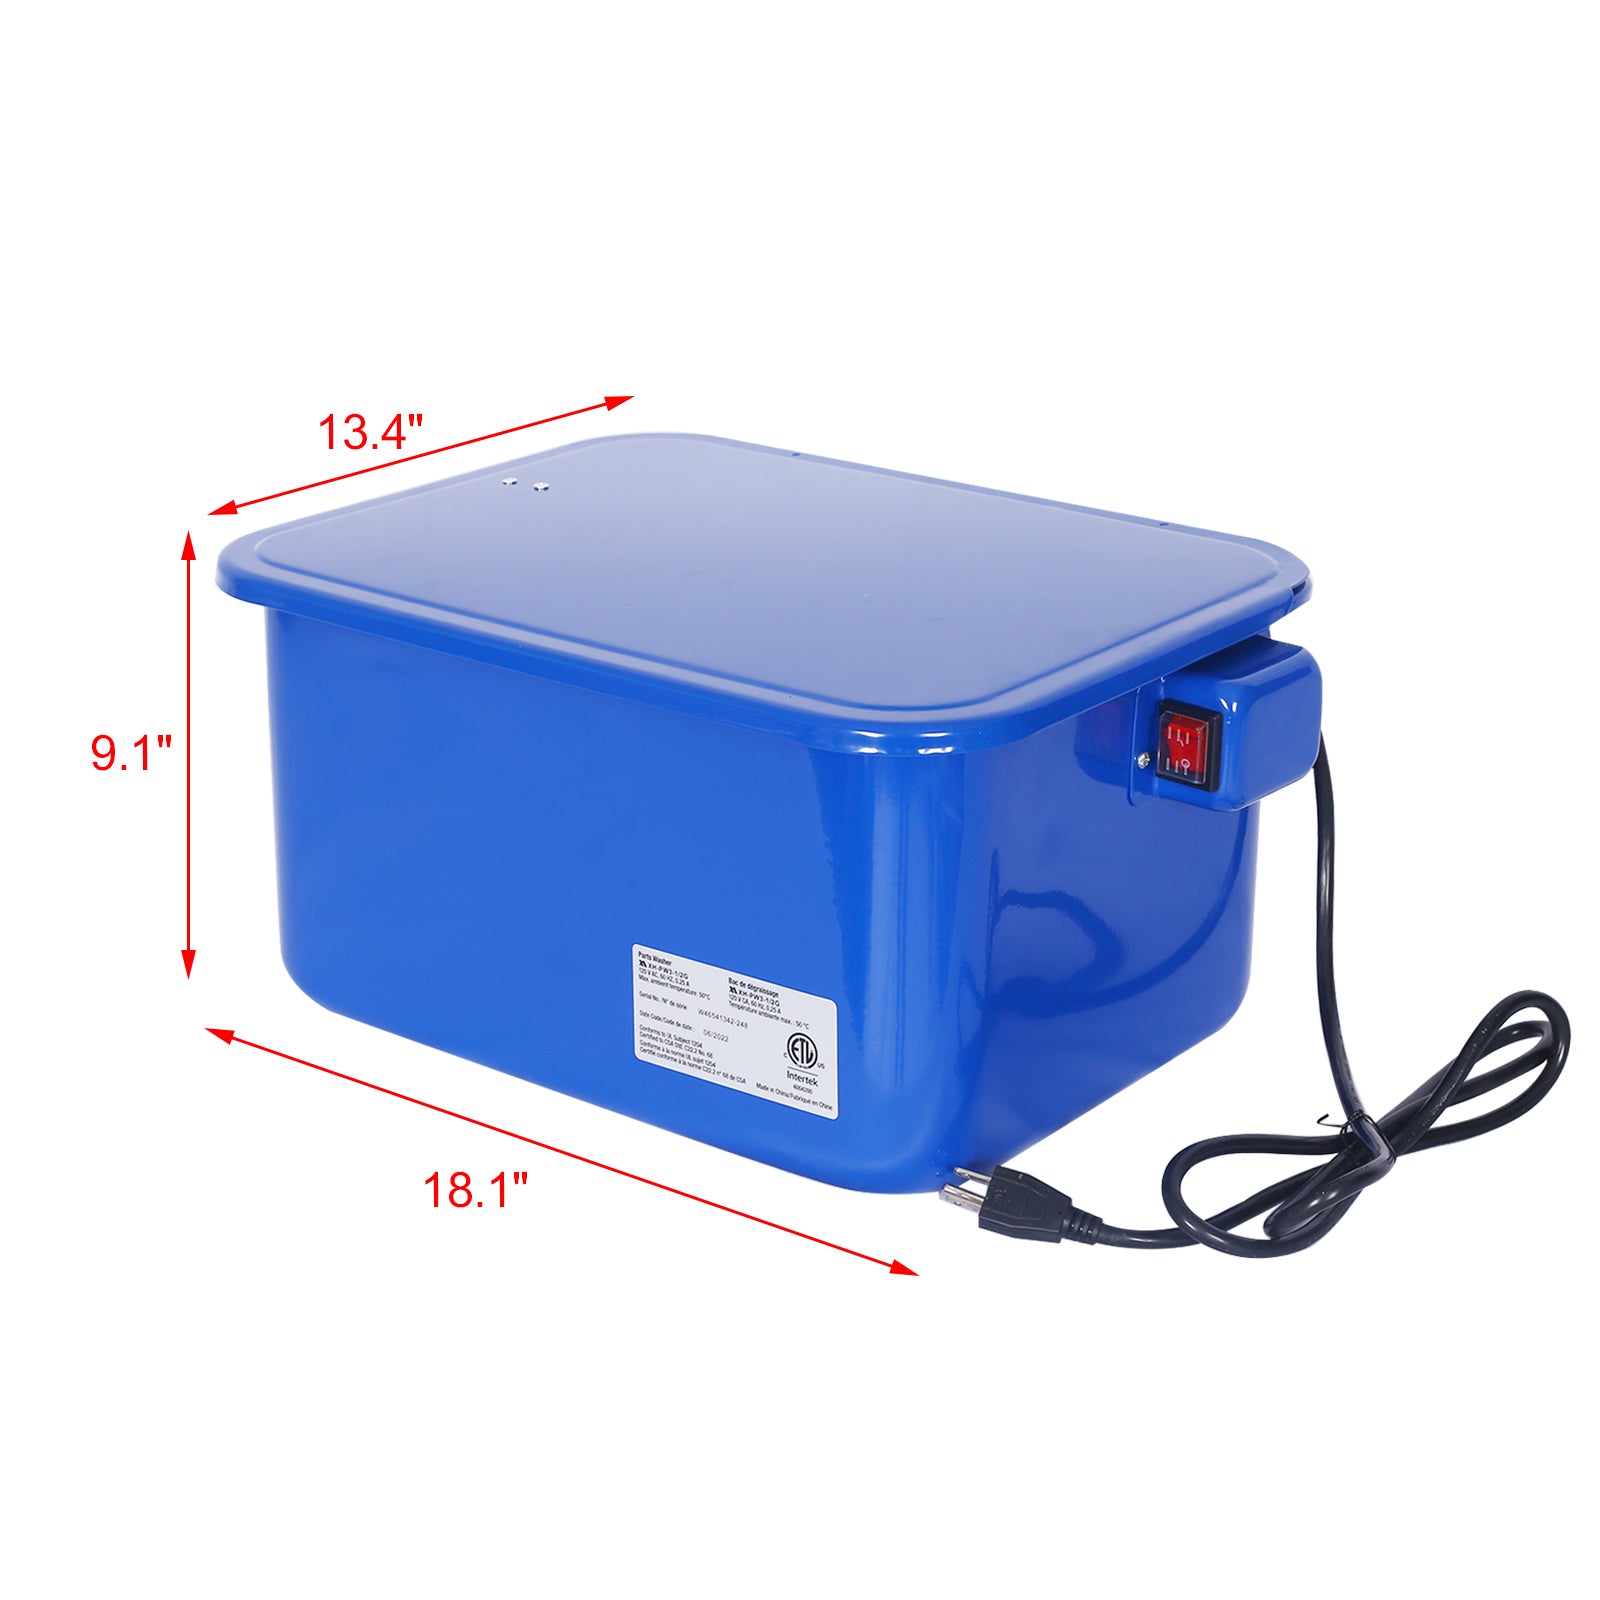 Cabinet parts washer with 110v pump,3.5 gallon BENCHTOP PARTS WASHER ,AUTOMOTIVE PARTS WASHER ELECTRICAL PUMP - Tonkn